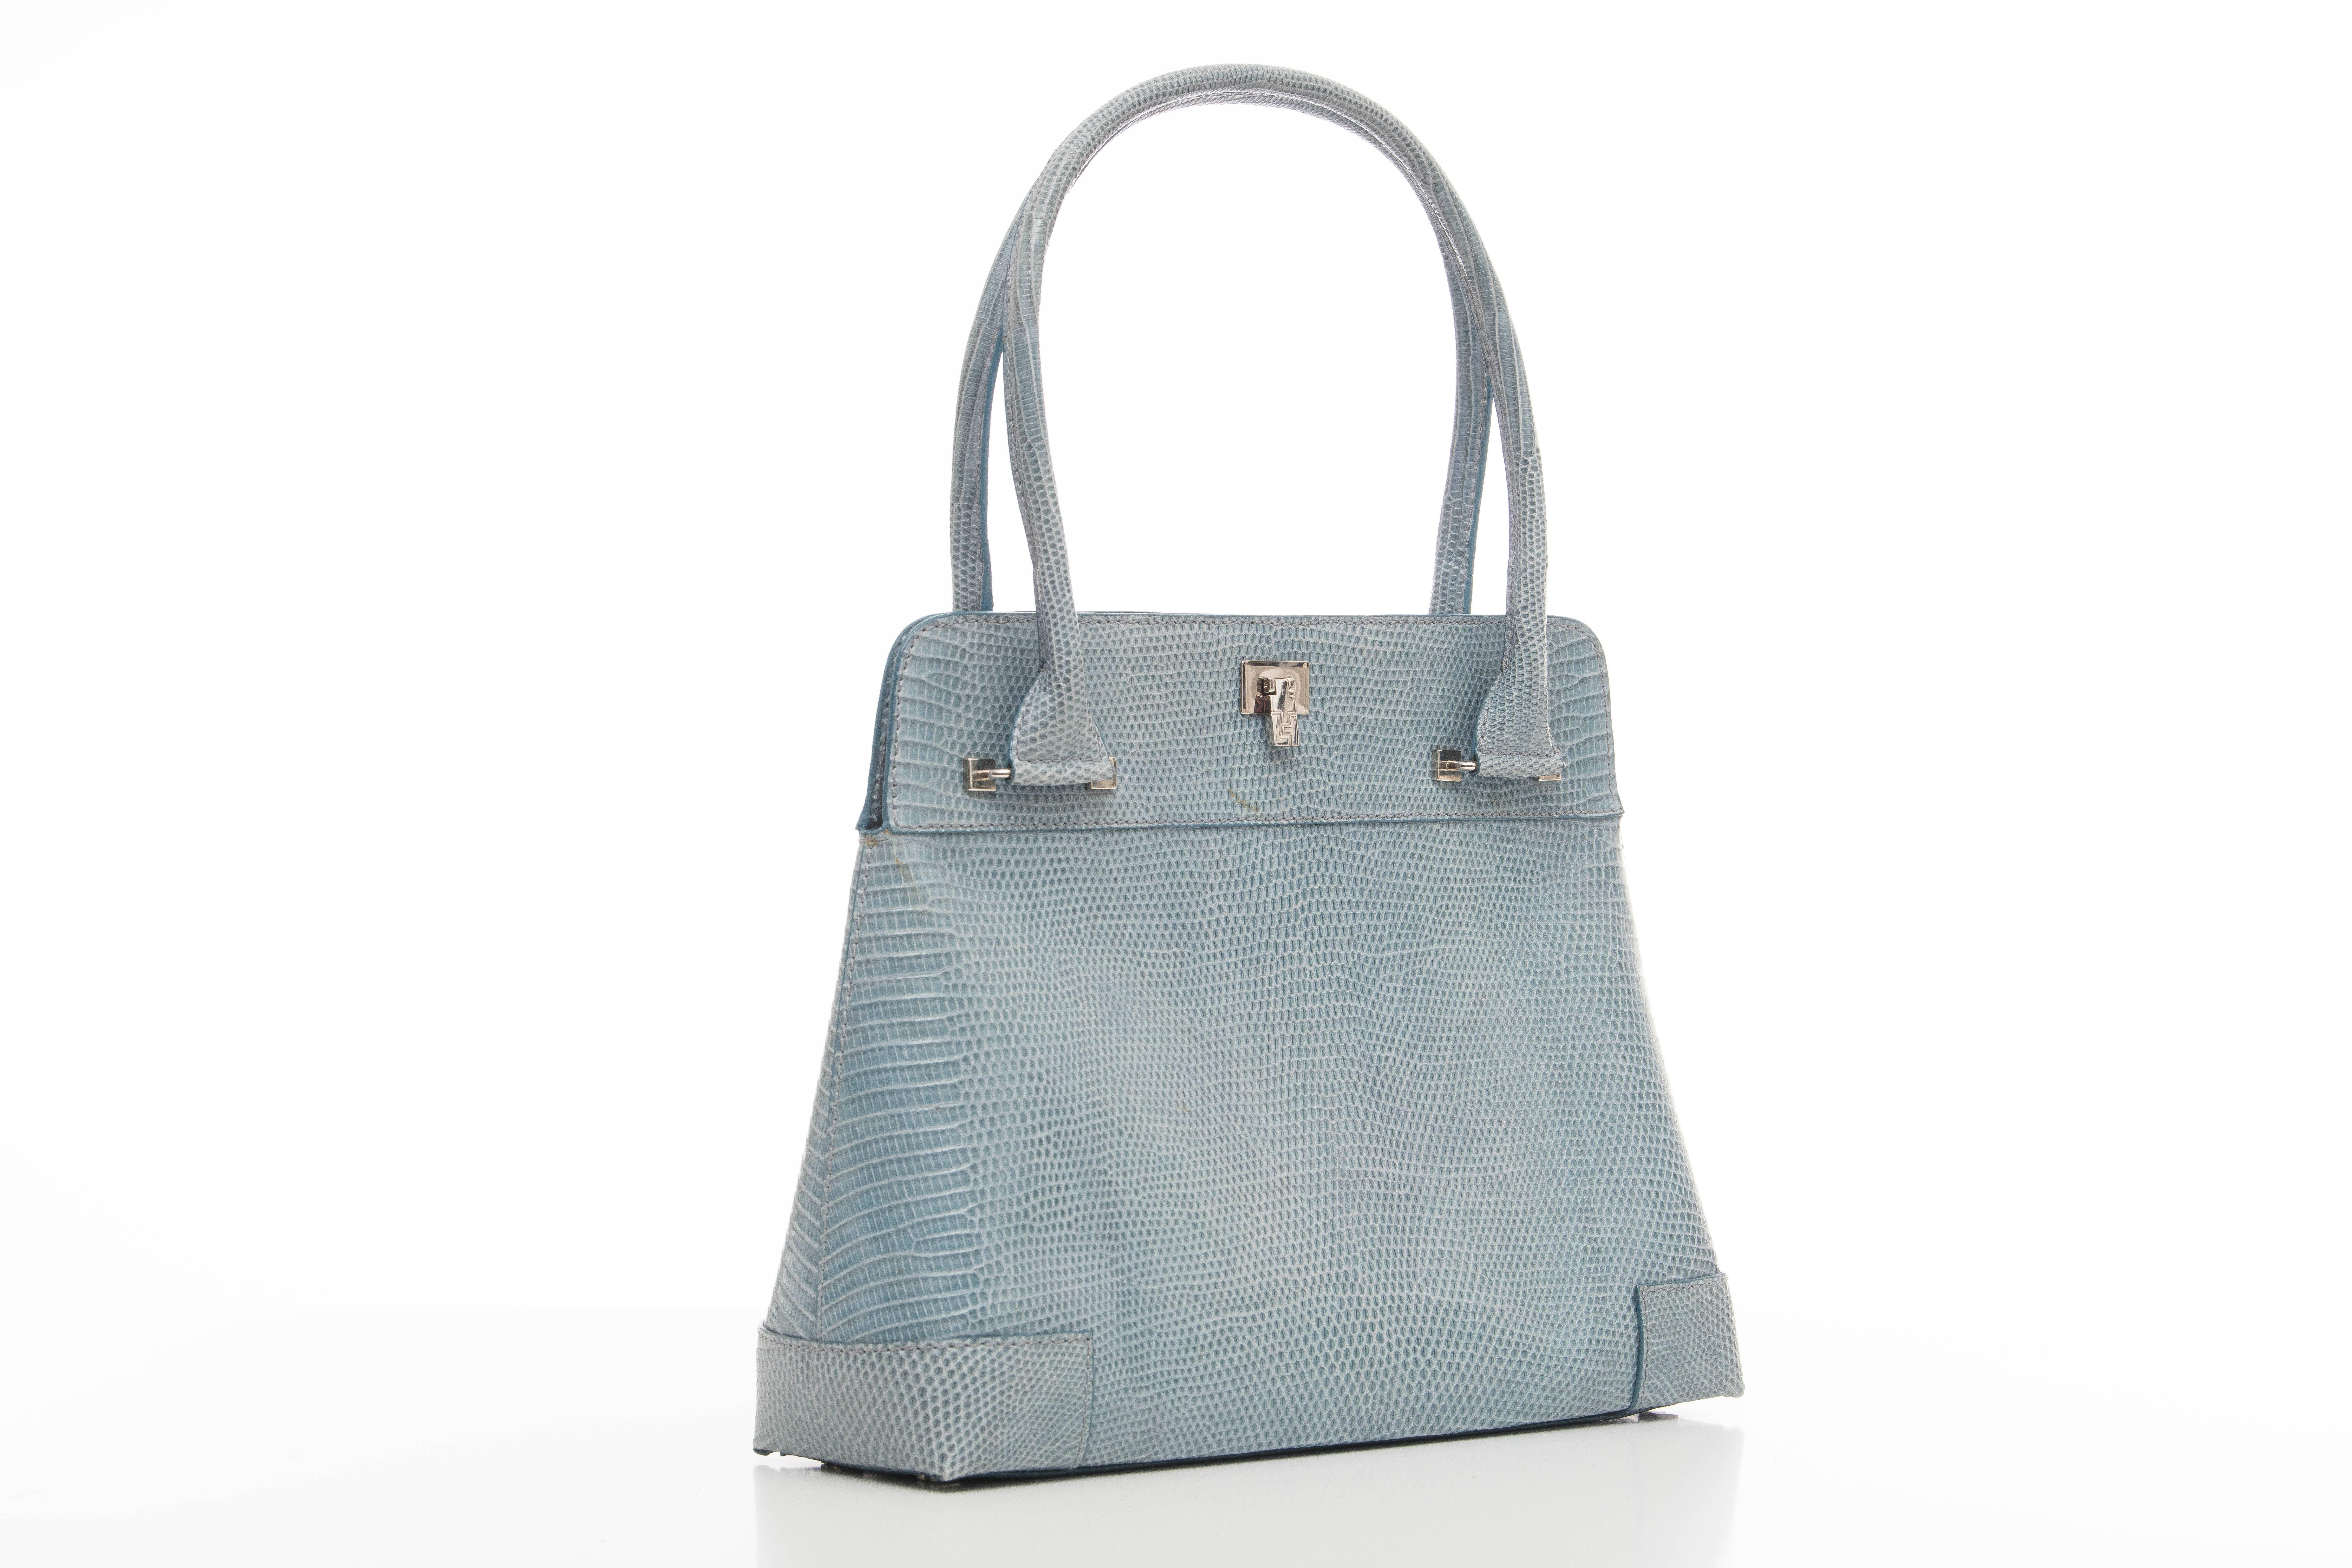 Lambertson Truex, Circa 2004 baby blue lizard handbag with silver tone flip lock closure, single zip interior pocket with three card slots and key holder and fully lined in suede.

Width 12, Height With Handle 17, Without Handle 10, Depth 4